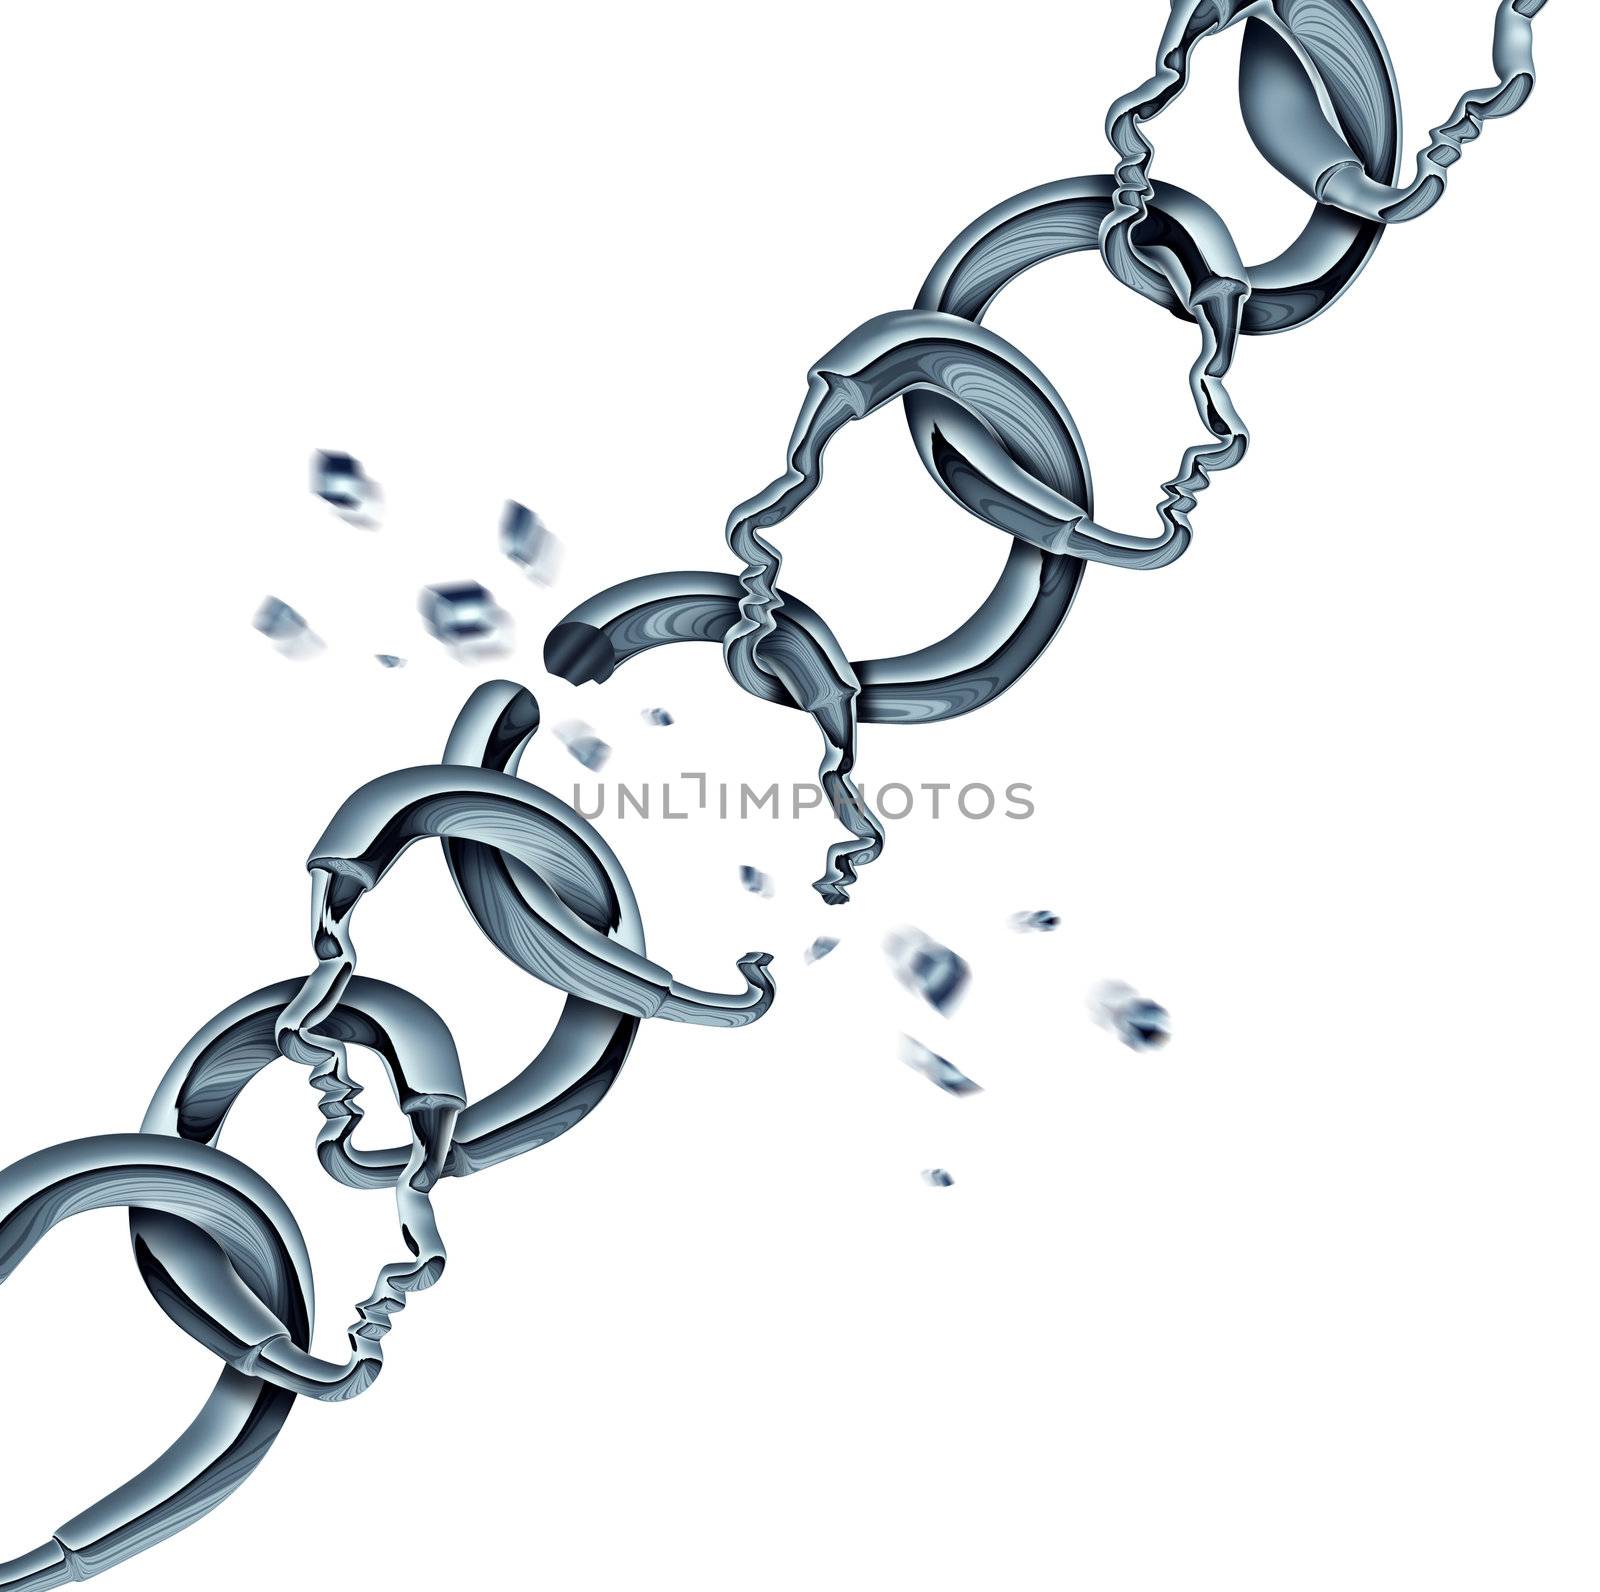 Team problems and business disagreement concept with a broken metal chain link partnership shaped as human heads
as a symbol of divorce and separation and the end of a contract agreement.